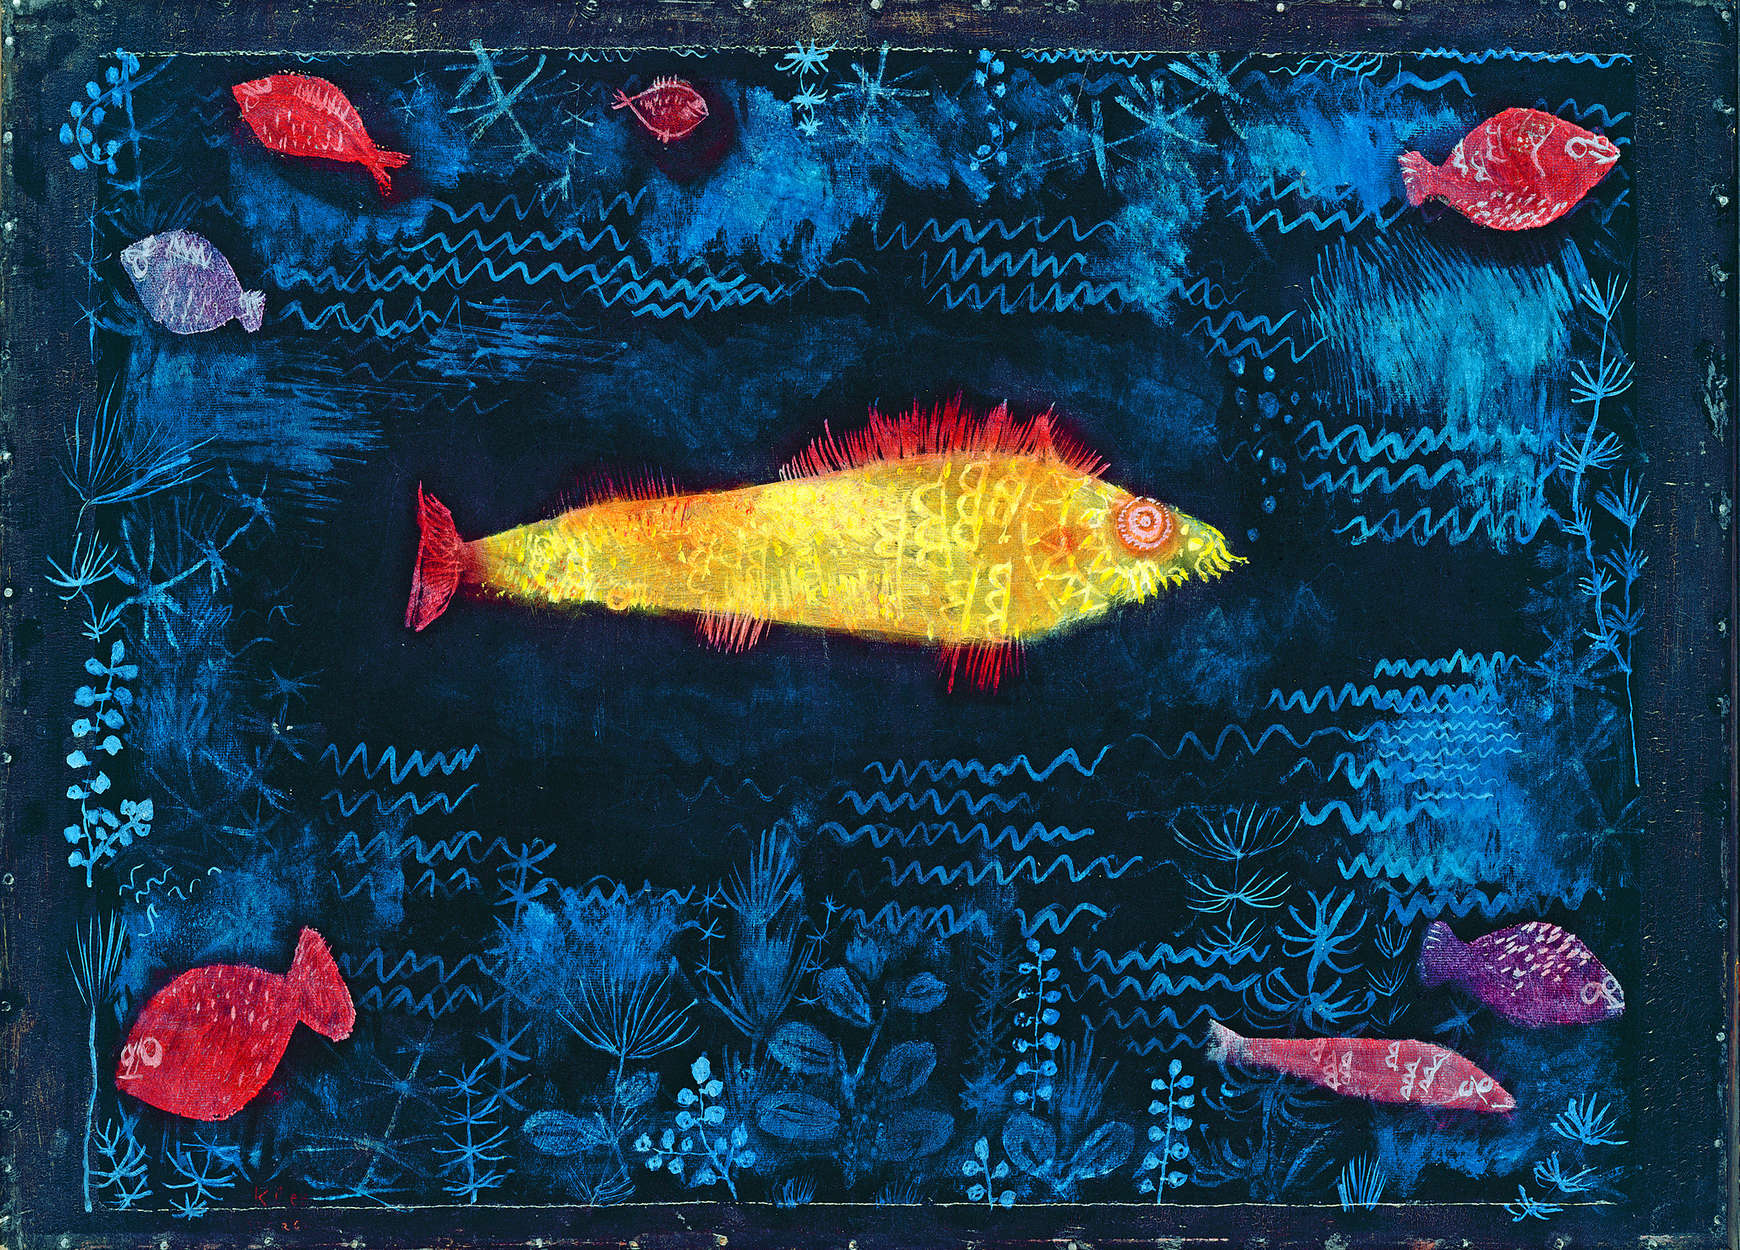             Photo wallpaper "The goldfish" by Paul Klee
        